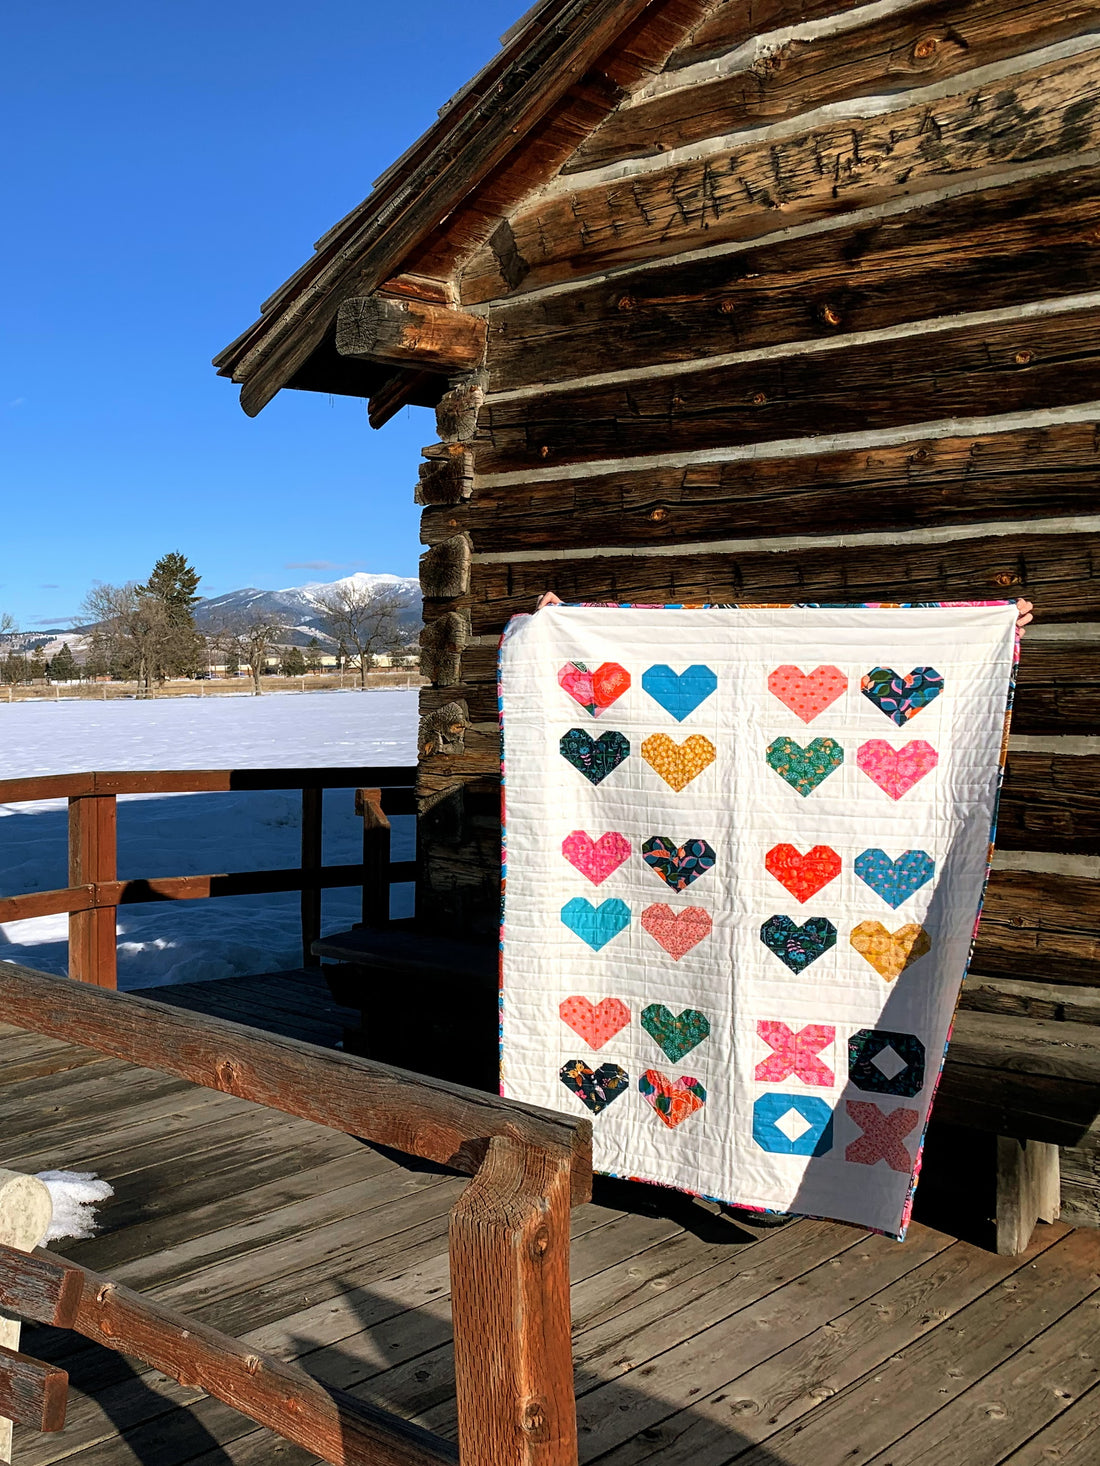 Multi color heart quilt in front of log building with snow and blue sky